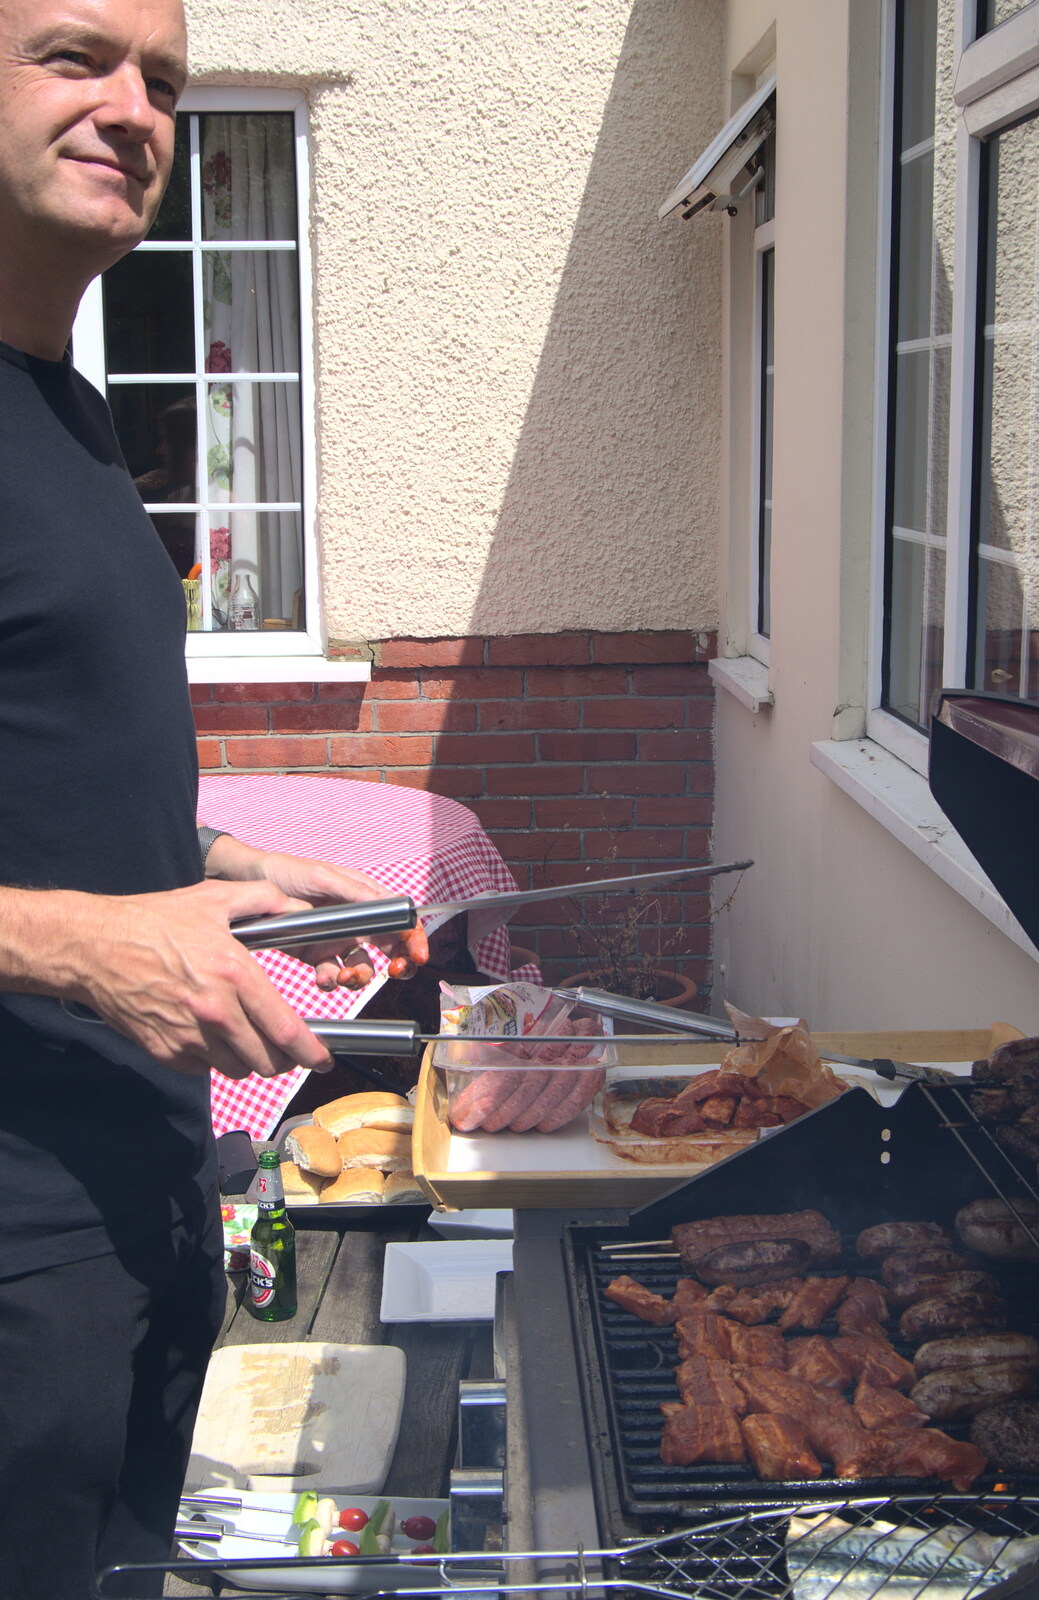 Nosher's on cooking duty from A Barbeque at Sean's, Walkford, Dorset - 28th July 2018